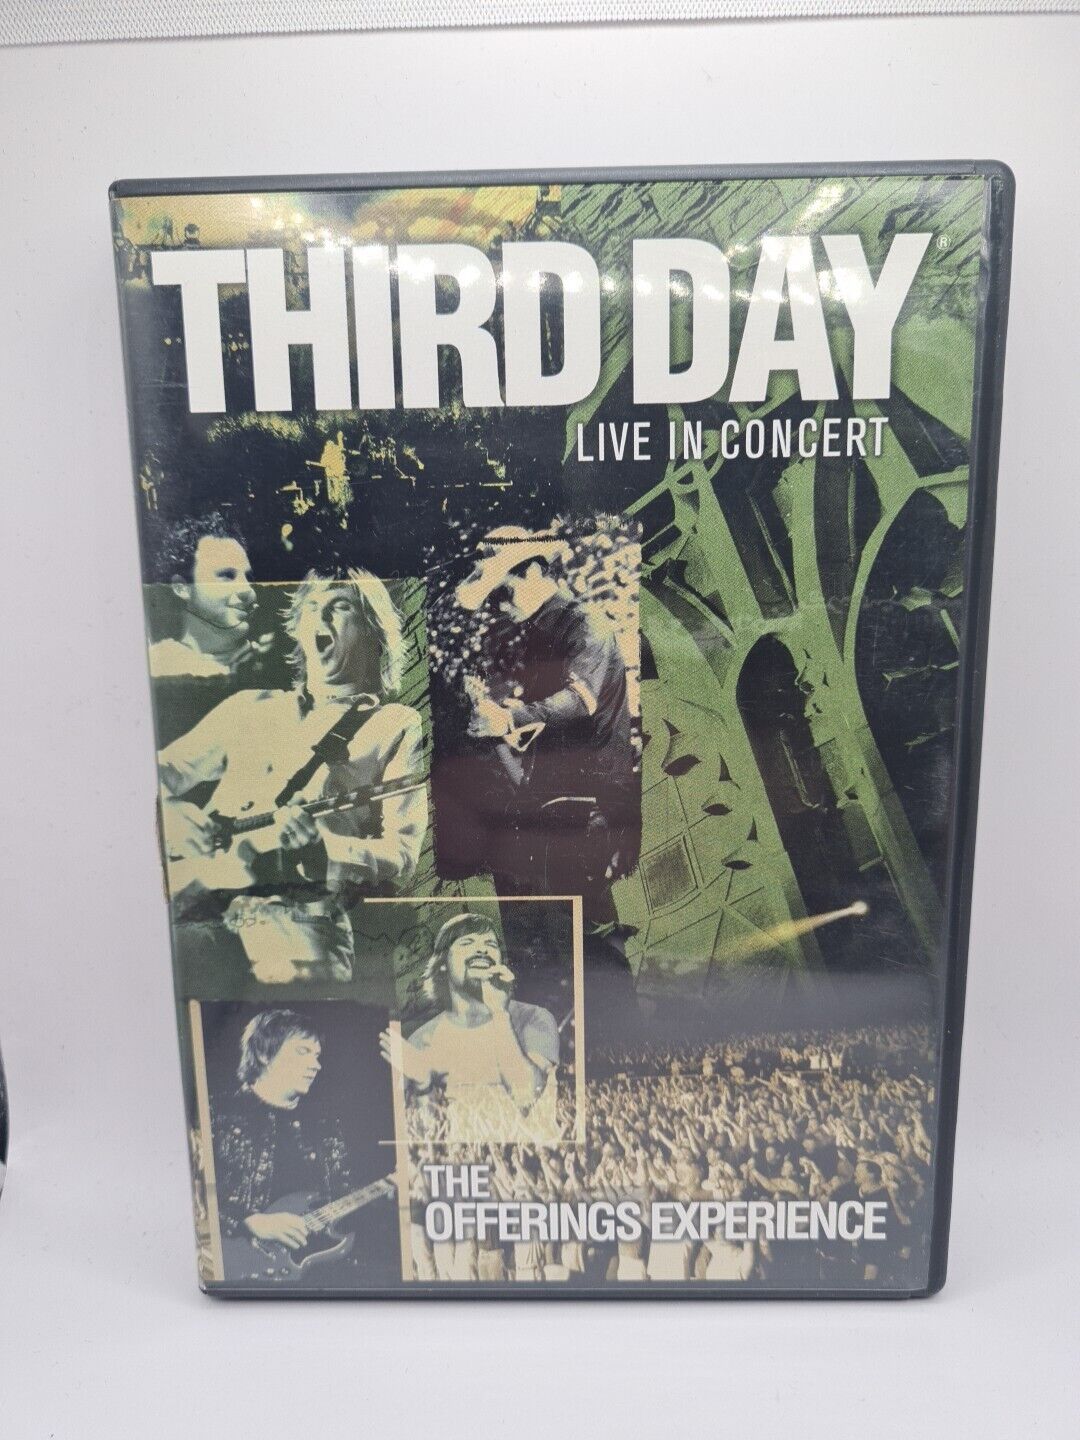 Third Day Live in Concert - The Offerings Experience - Third Day (DVD, 2002) #13